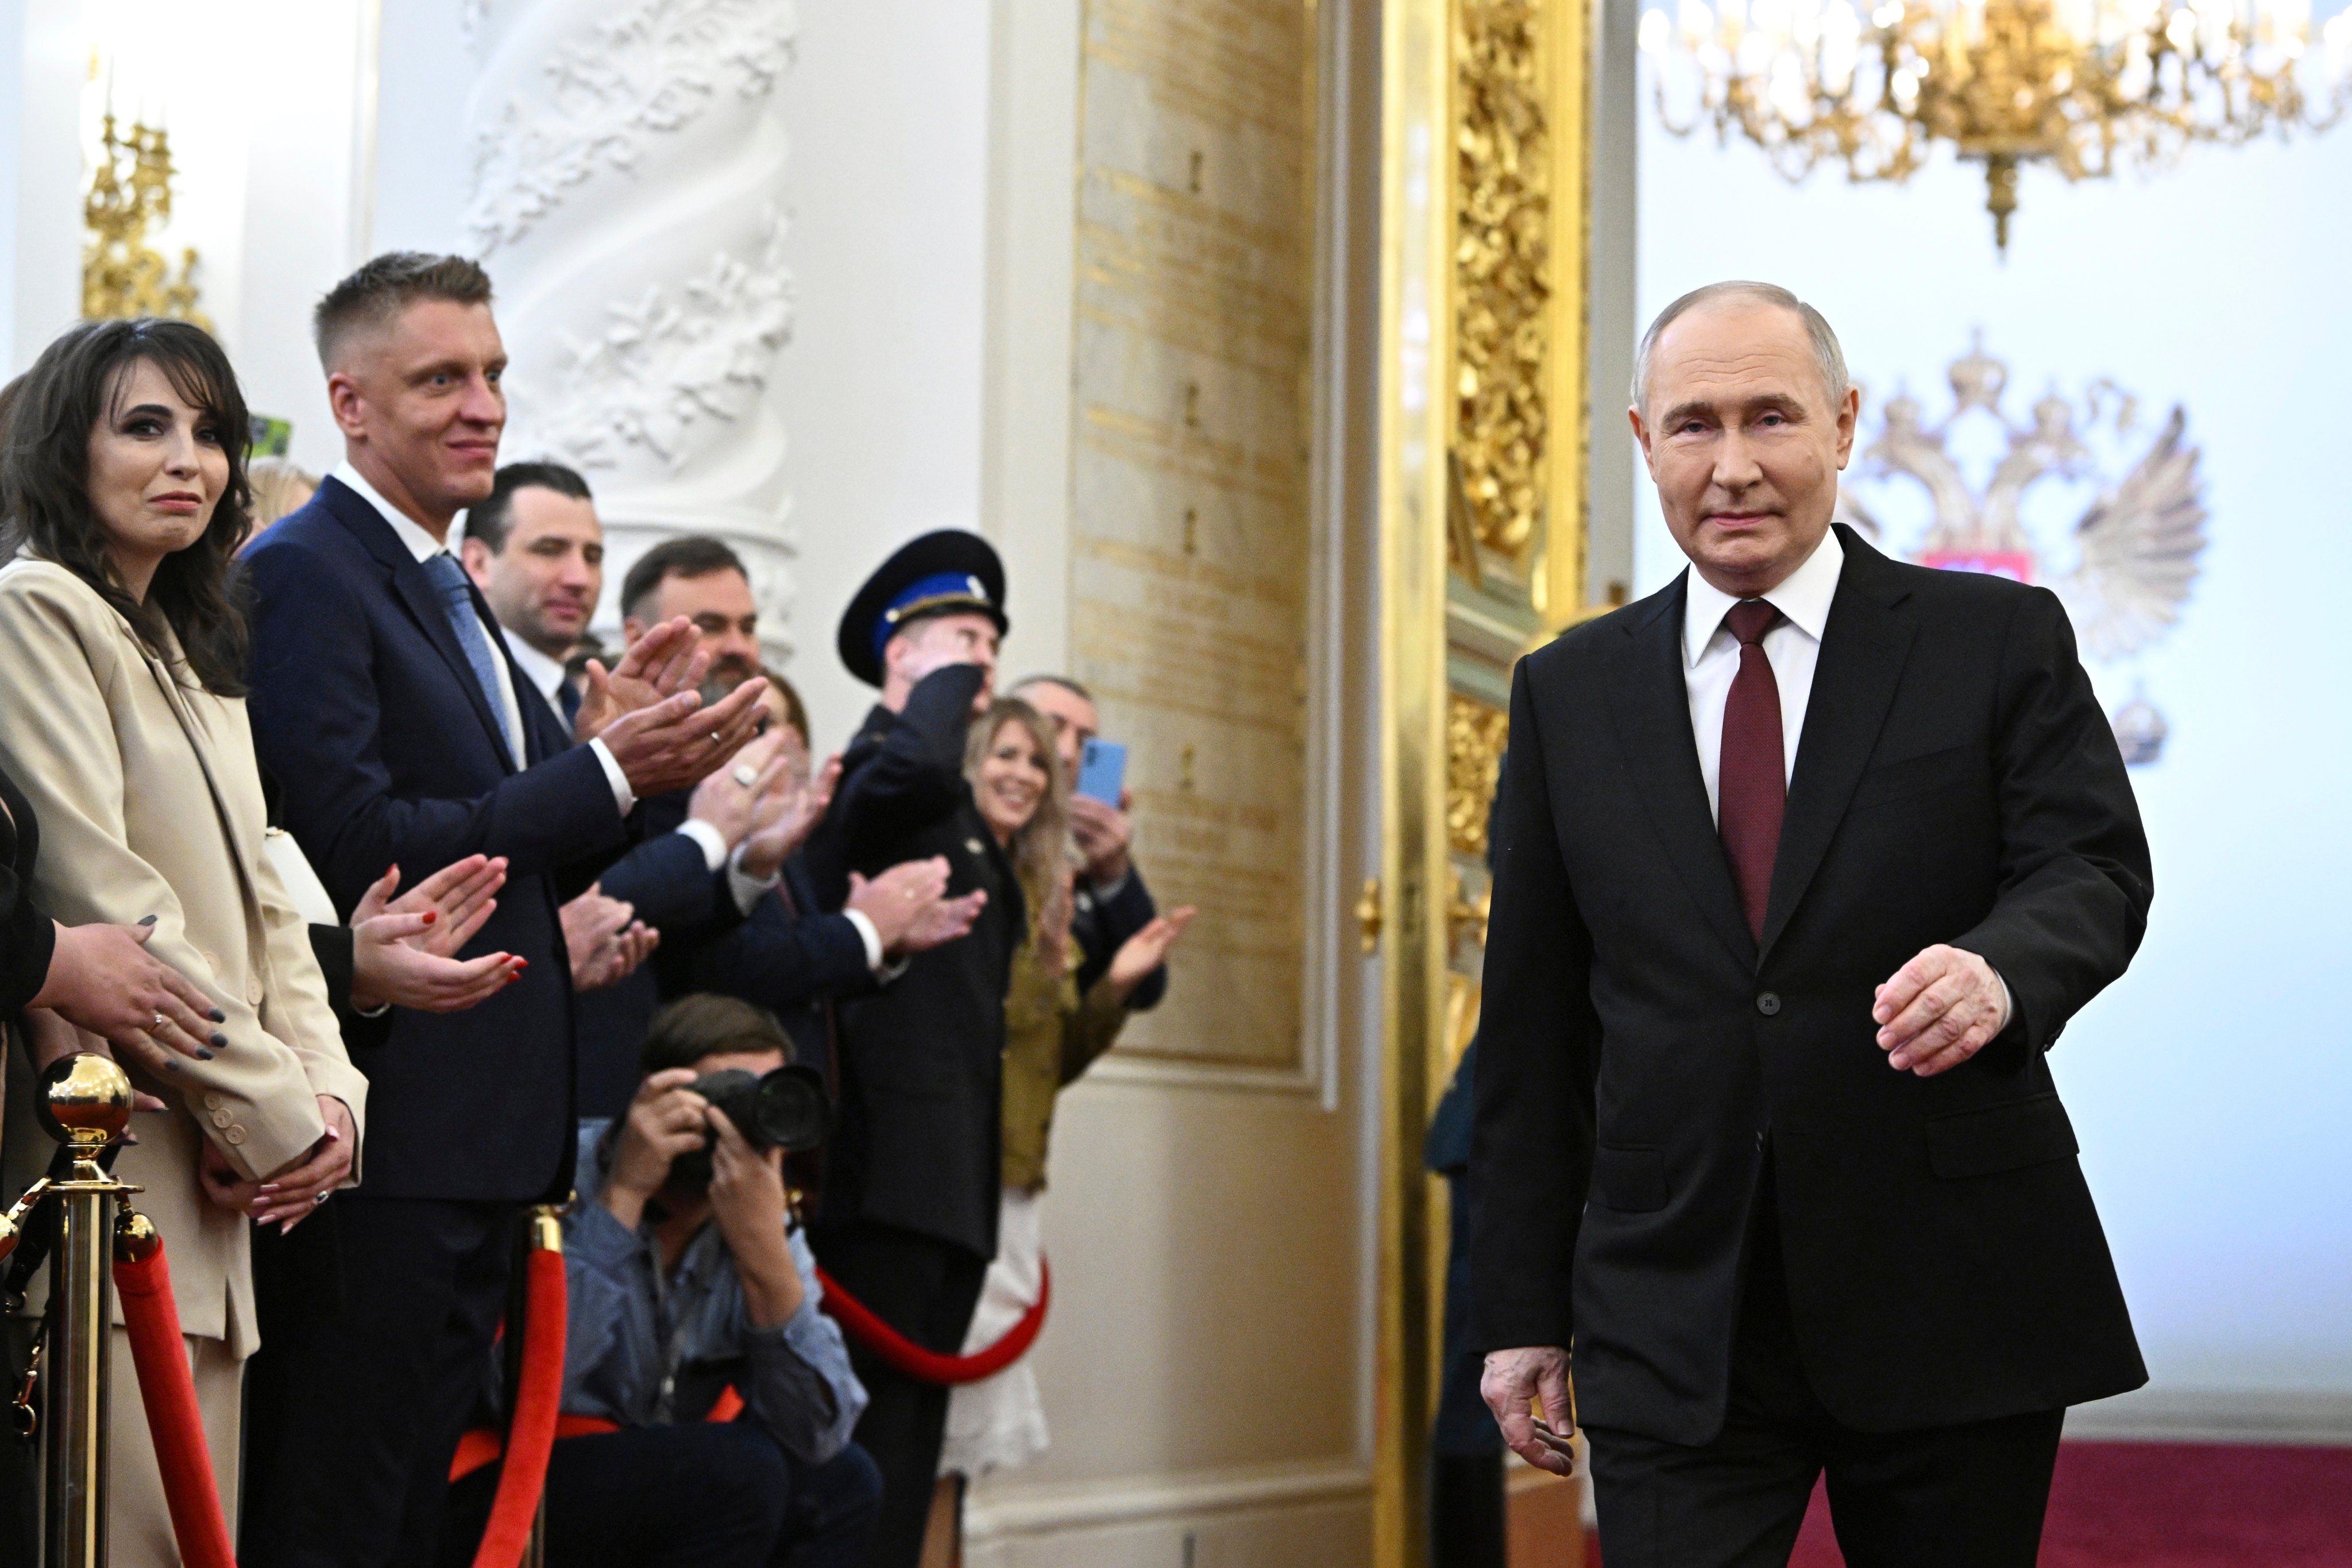 Vladimir Putin arrives for an inauguration ceremony to begin his fifth term as Russian president in the Grand Kremlin Palace in Moscow on Tuesday. Photo: Sputnik, Kremlin Pool Photo via AP